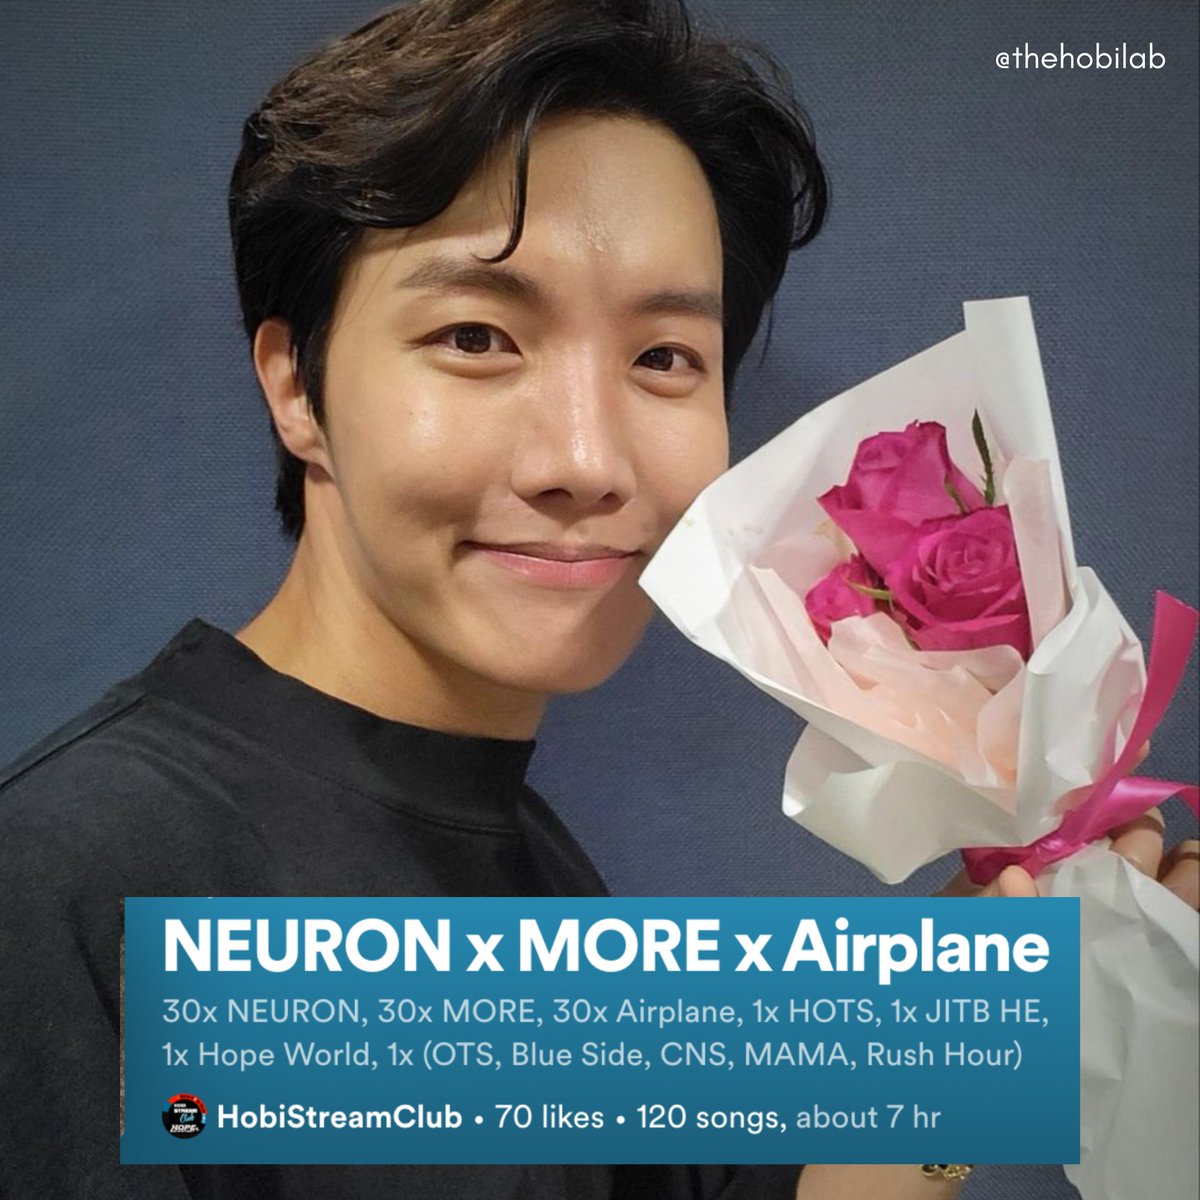 Can you believe this sweet face wrote high-intensity, highly-praised repertoire of songs from hip-hop funk (Neuron), rap-rock (More), and dreamy hip-hop (Airplane)? 😊 Here's a PL to support the eclectic music of a passionate angel. TGIF! 💐 #jhope tinyurl.com/THL7hrpl